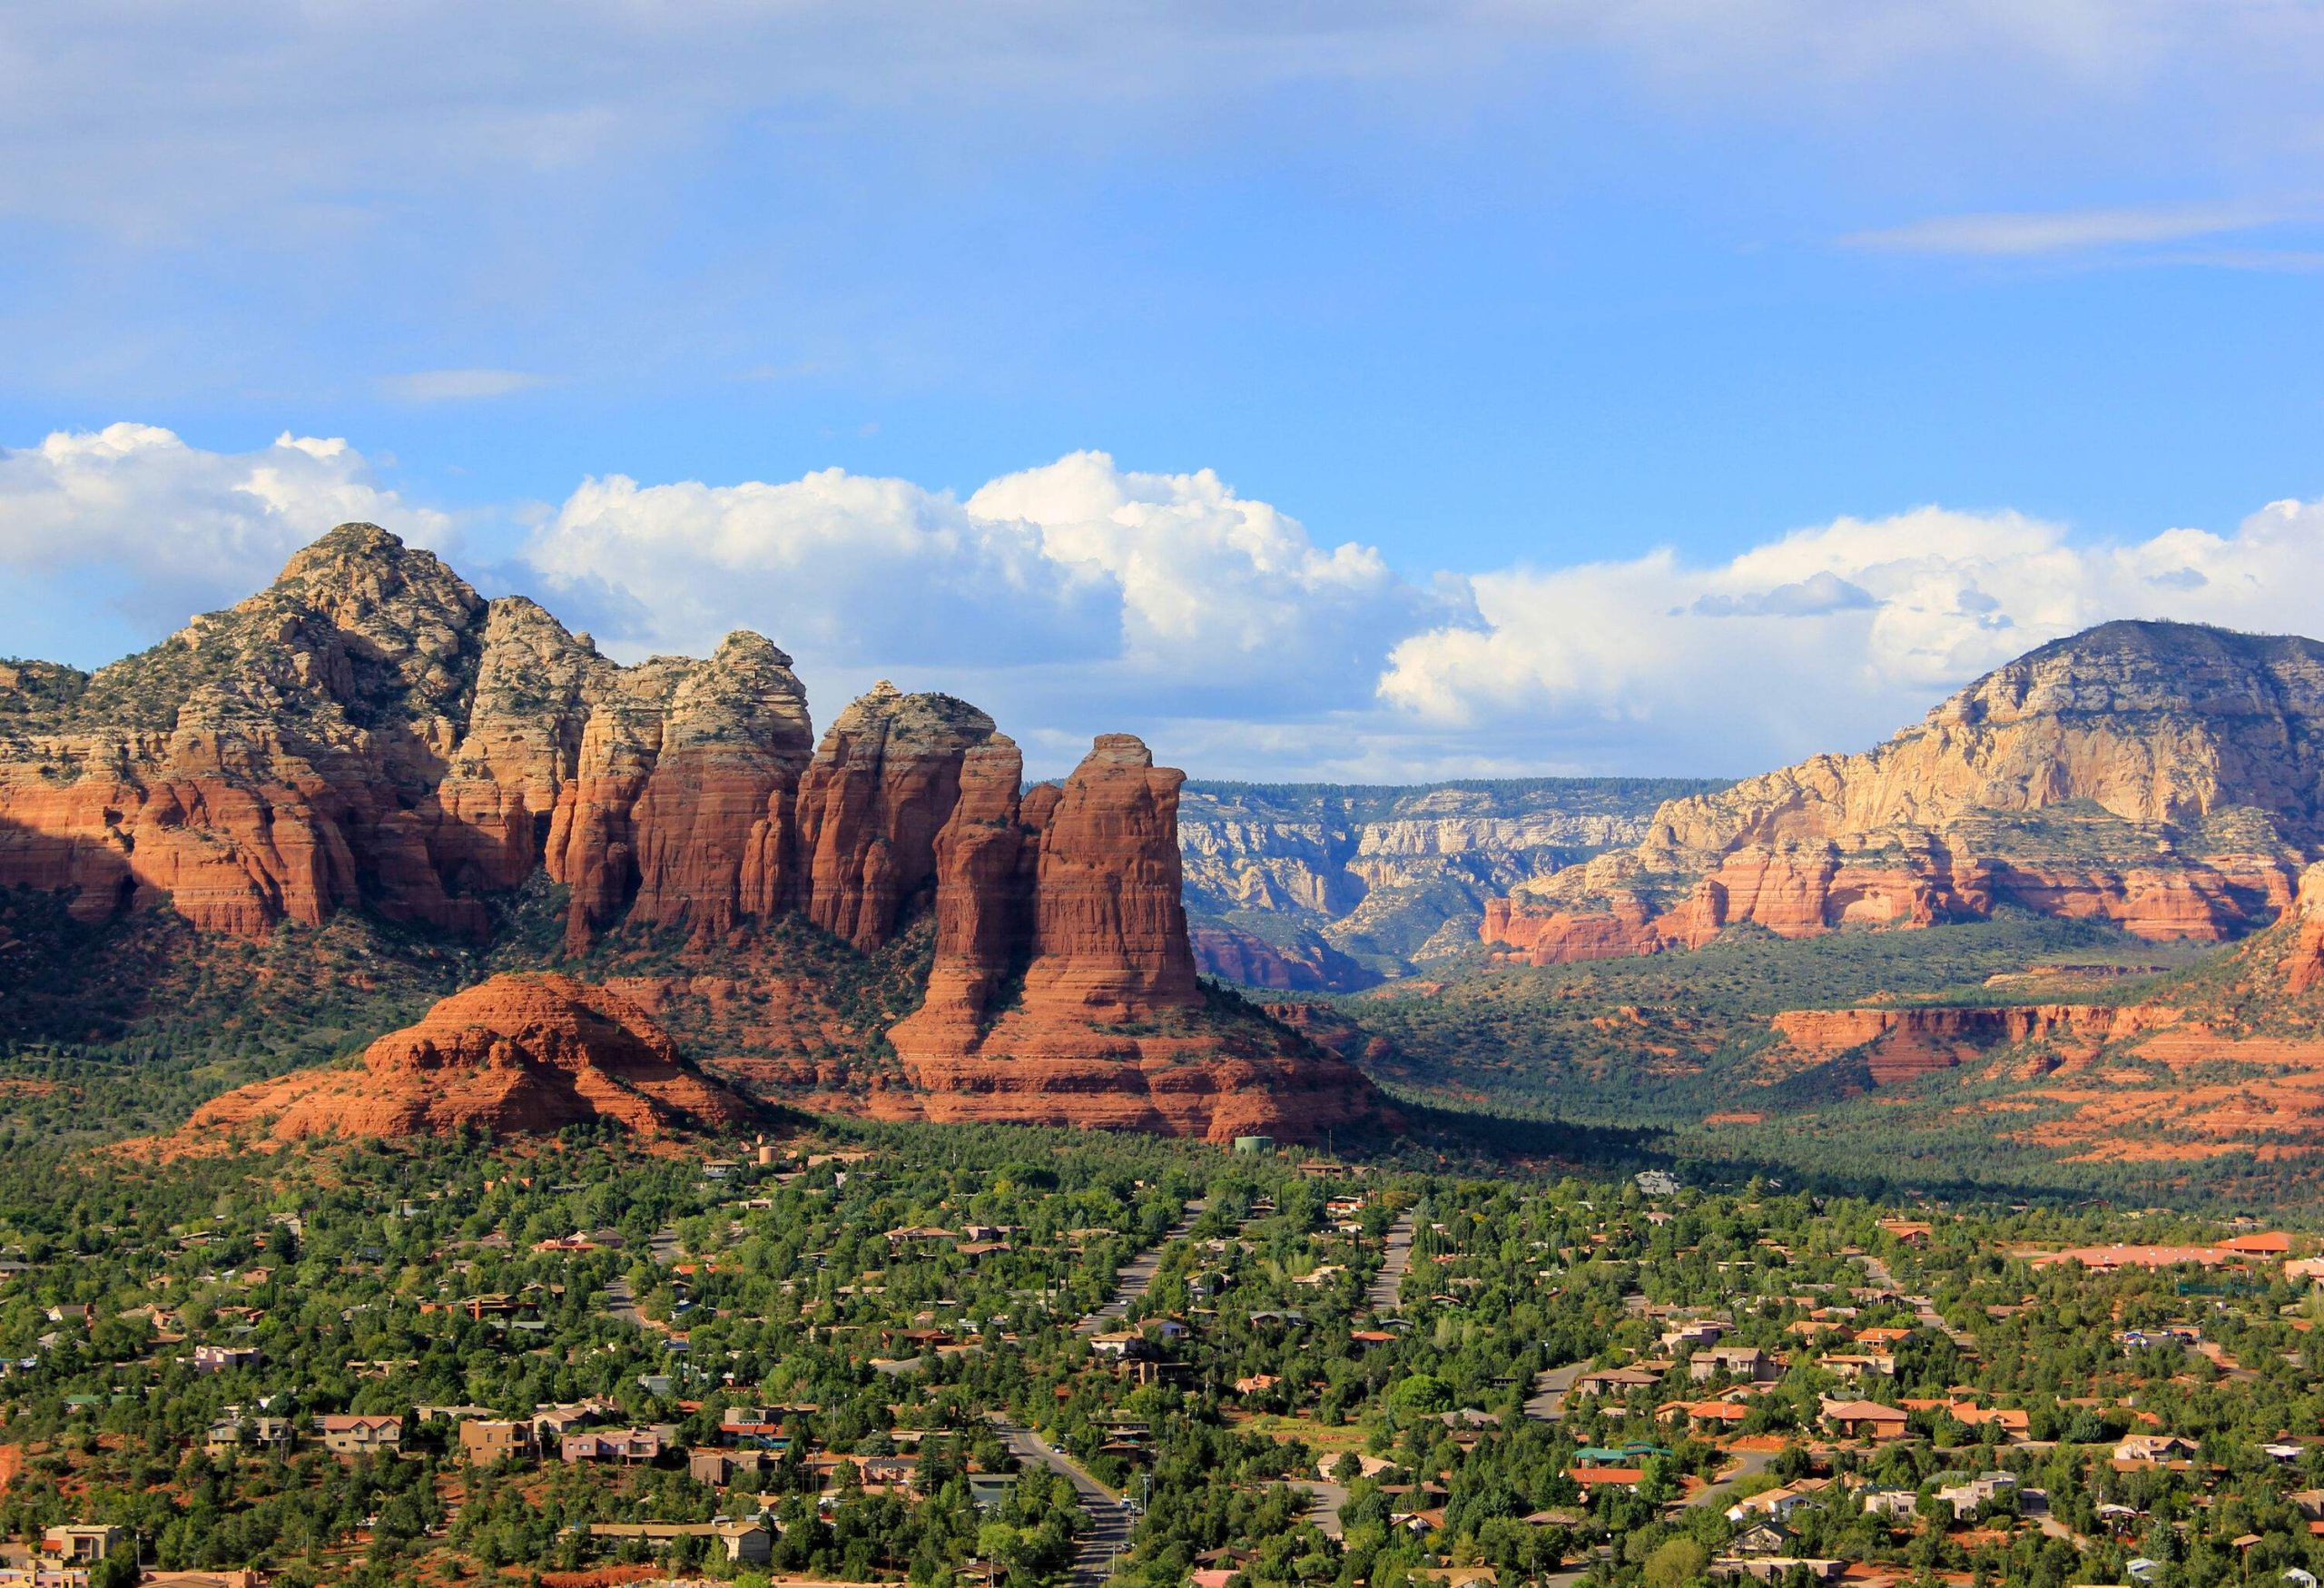 Houses scattered on the flatland in lush evergreen vegetation against a red rock scenery backdrop.